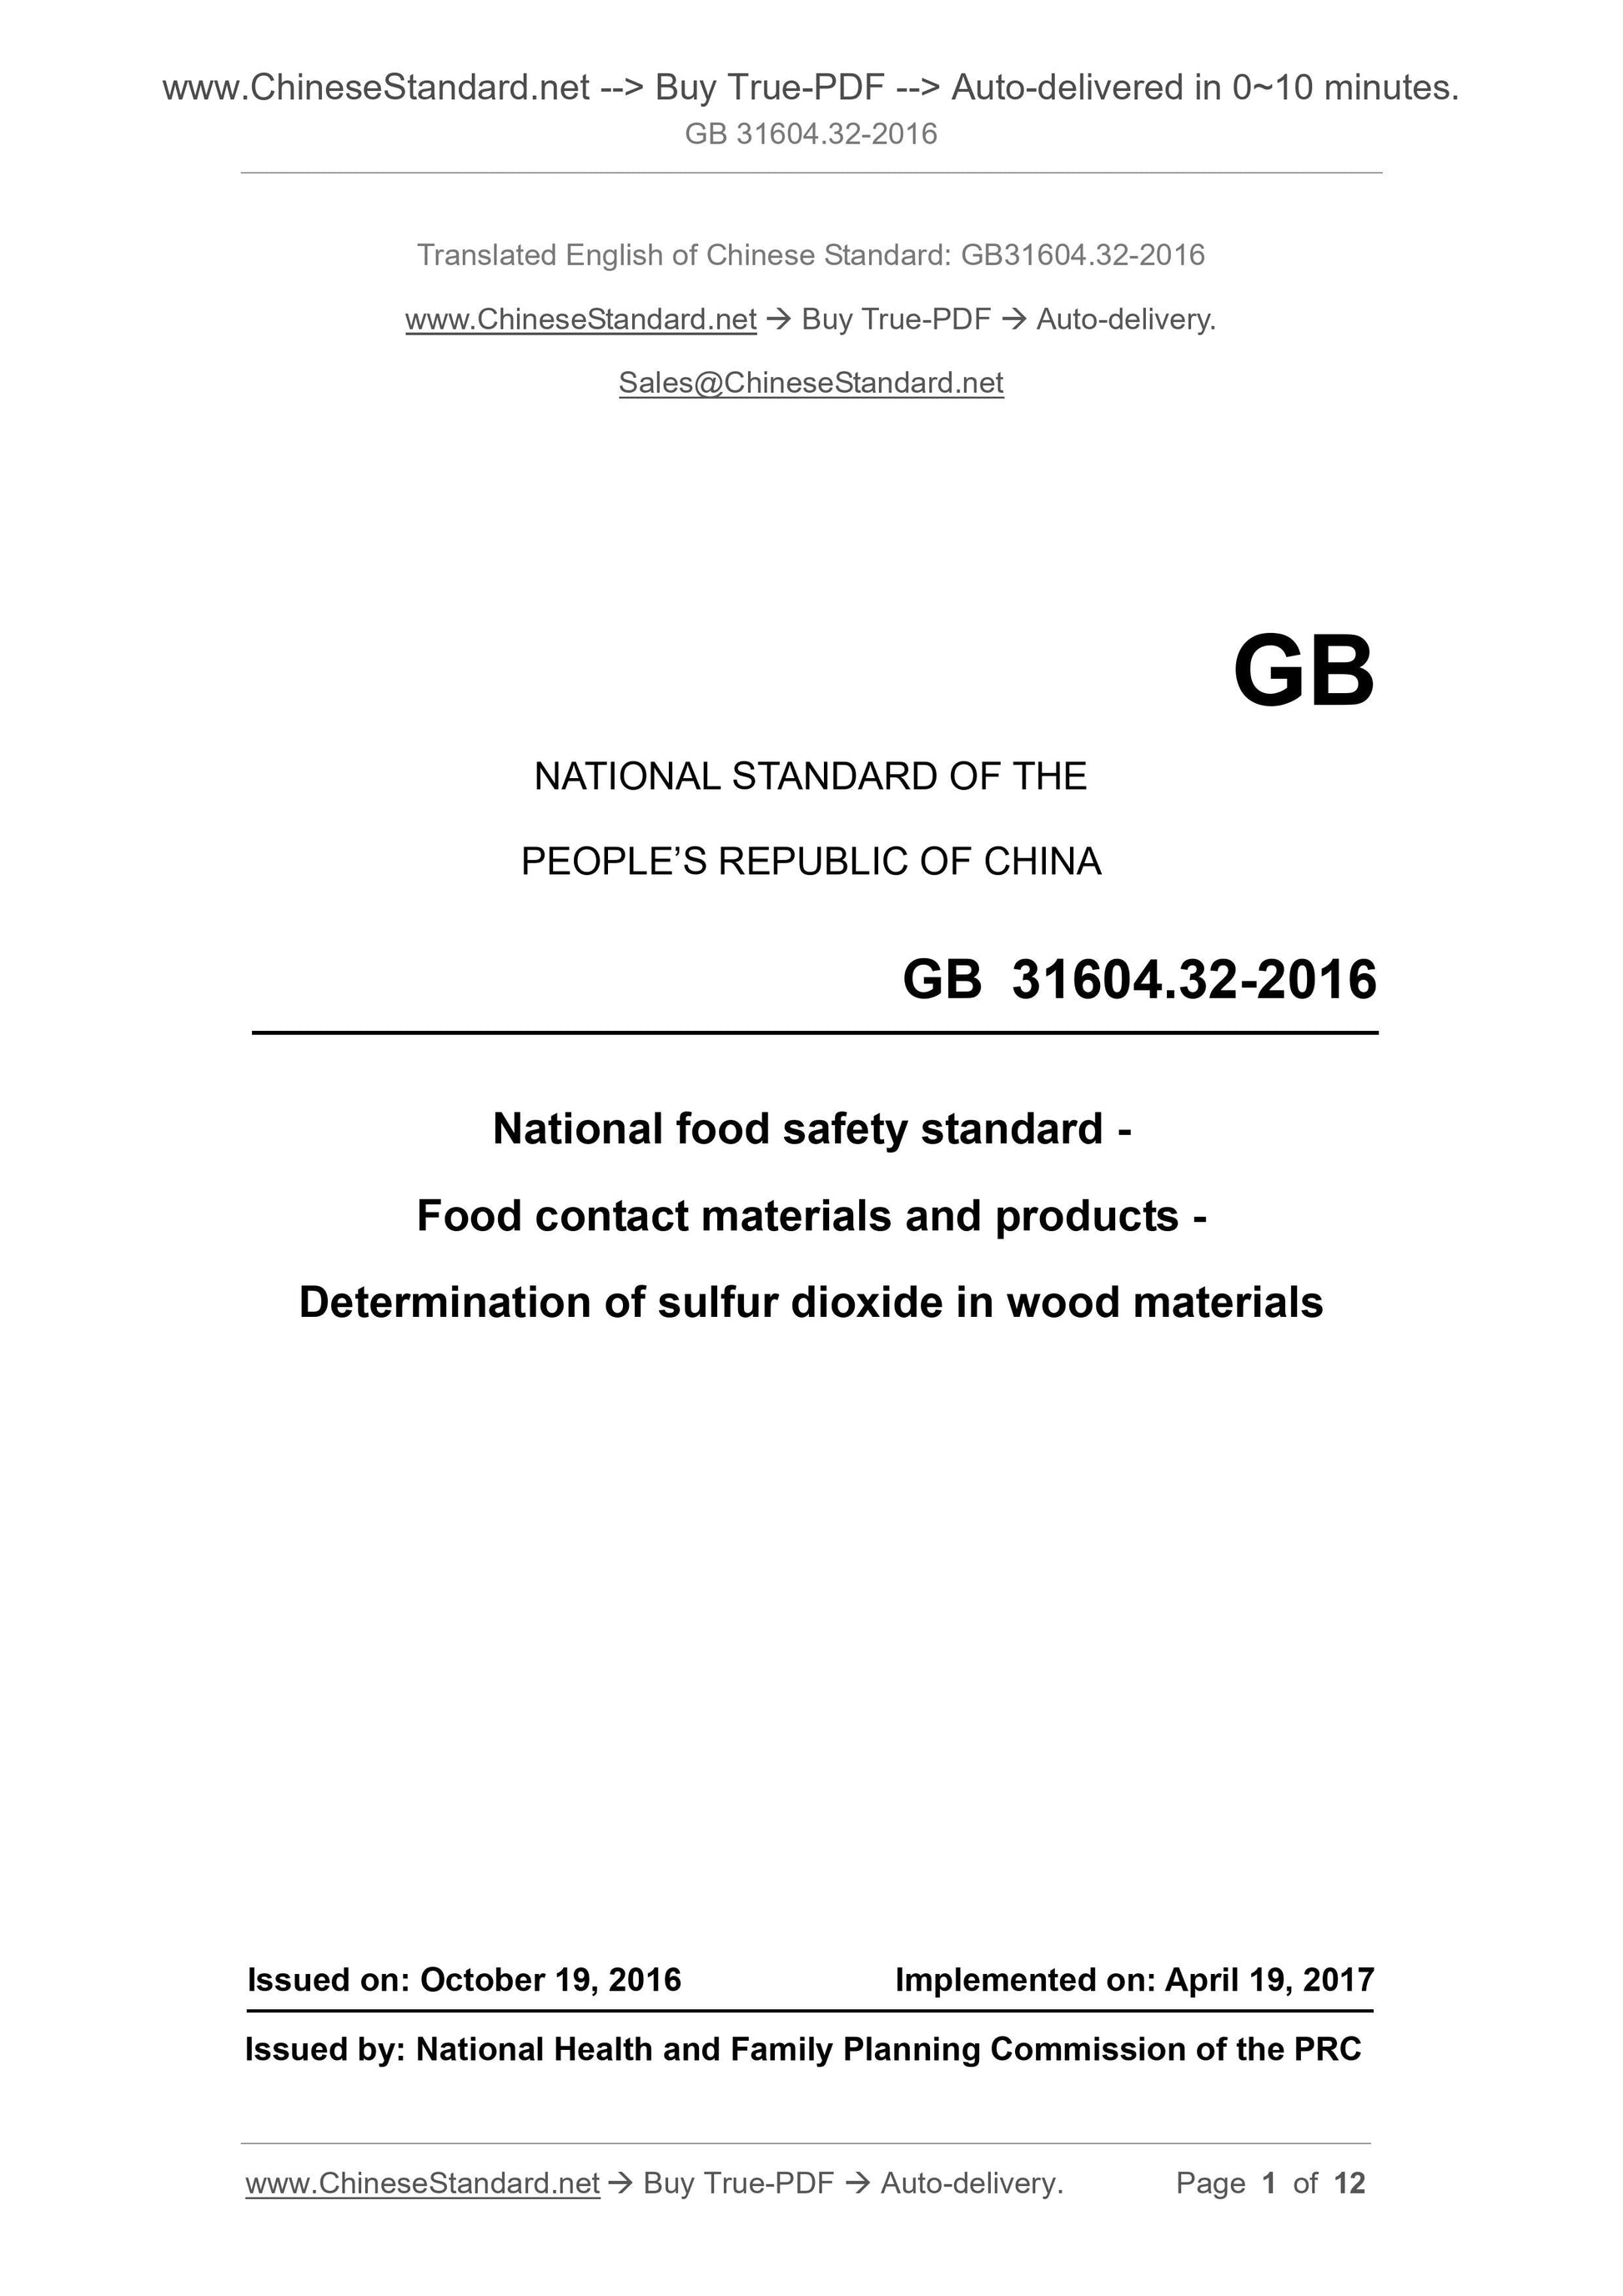 GB 31604.32-2016 Page 1